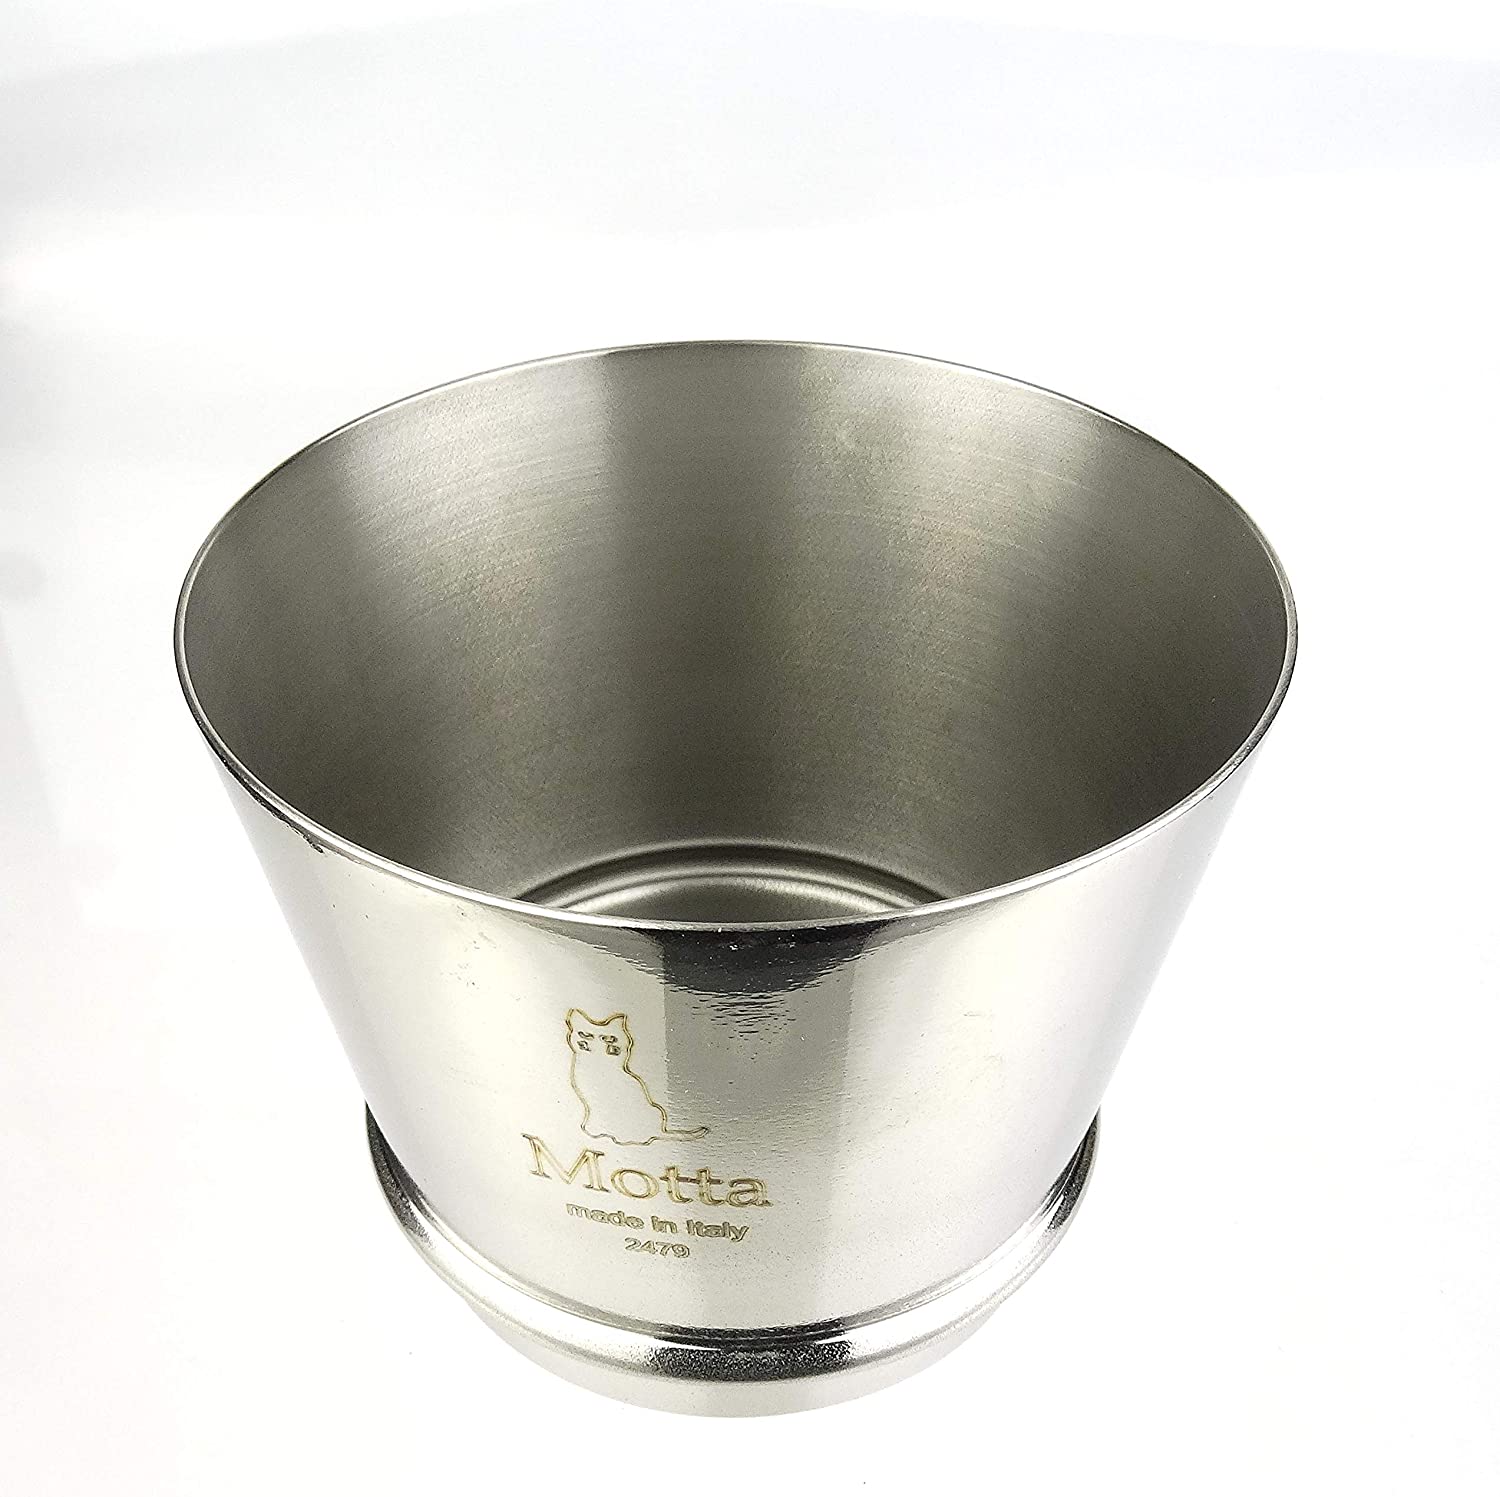 Metallurgica Motta Motta funnel for your espresso machine 40 mm height or 60 mm height Imbuto per macinacaffé Made in Italy